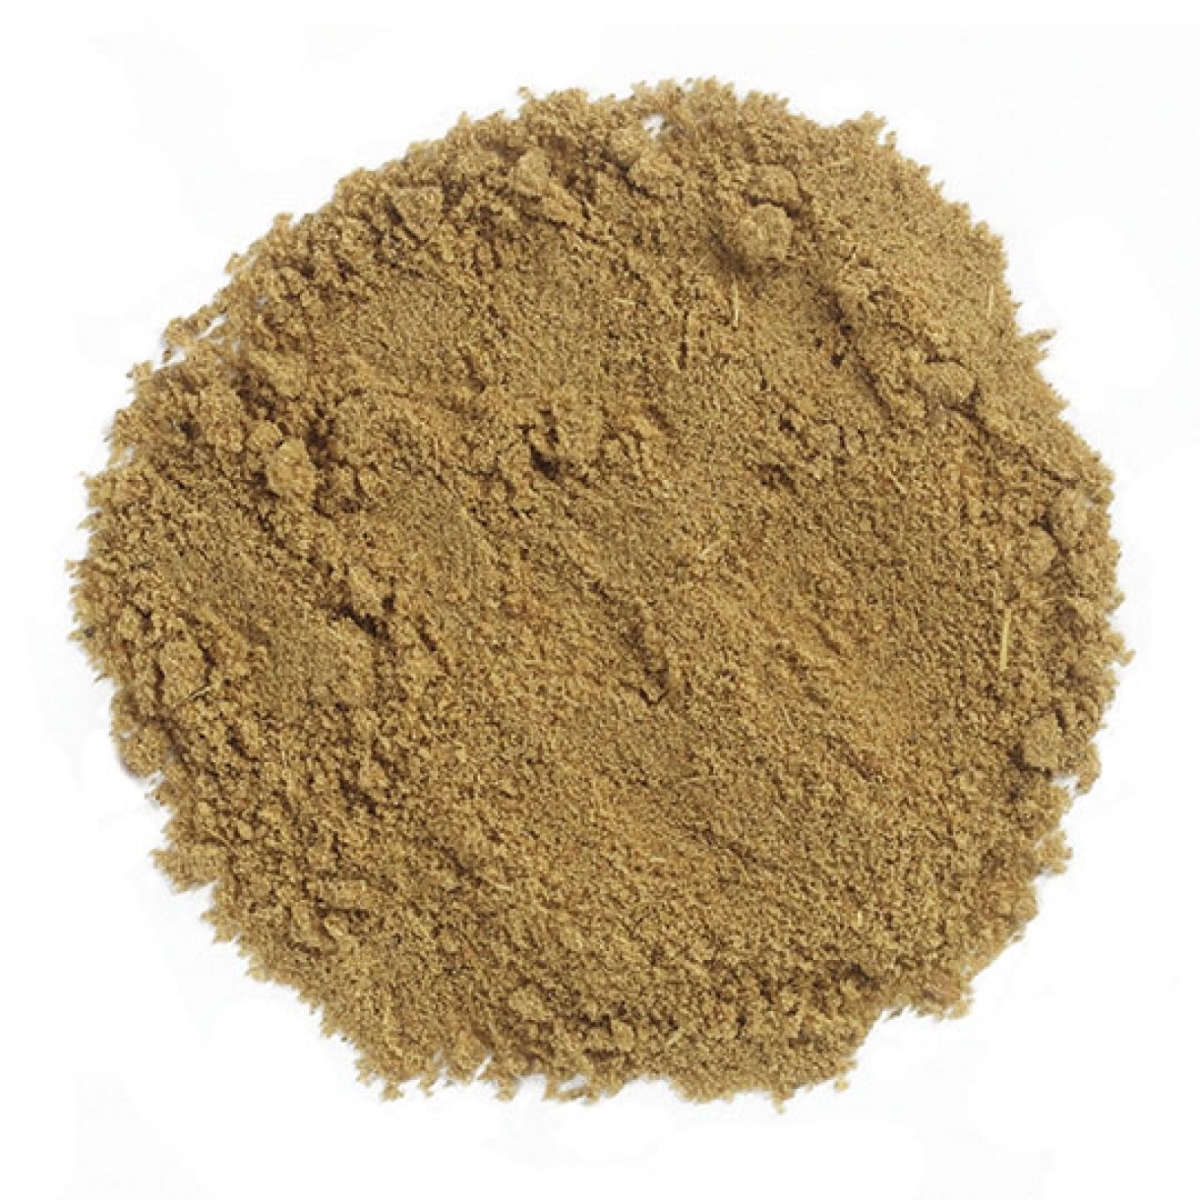 Picture of Frontier 31076 Organic Cumin Seed Ground Powder